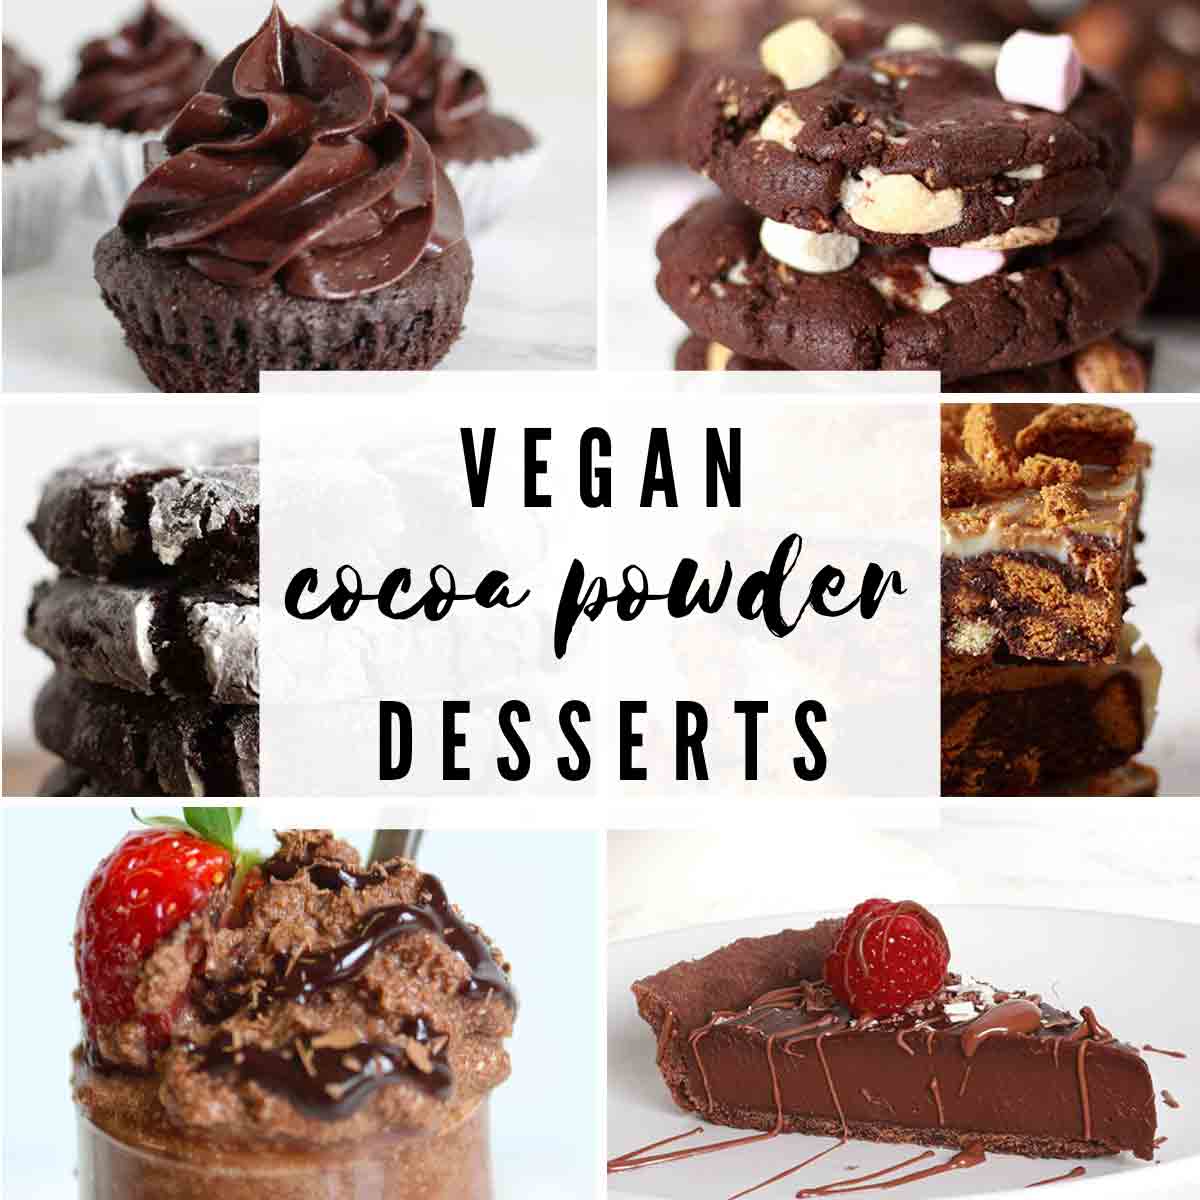 Desserts Image Collage With Text Overlay That Reads 'vegan Cocoa Powder Desserts'